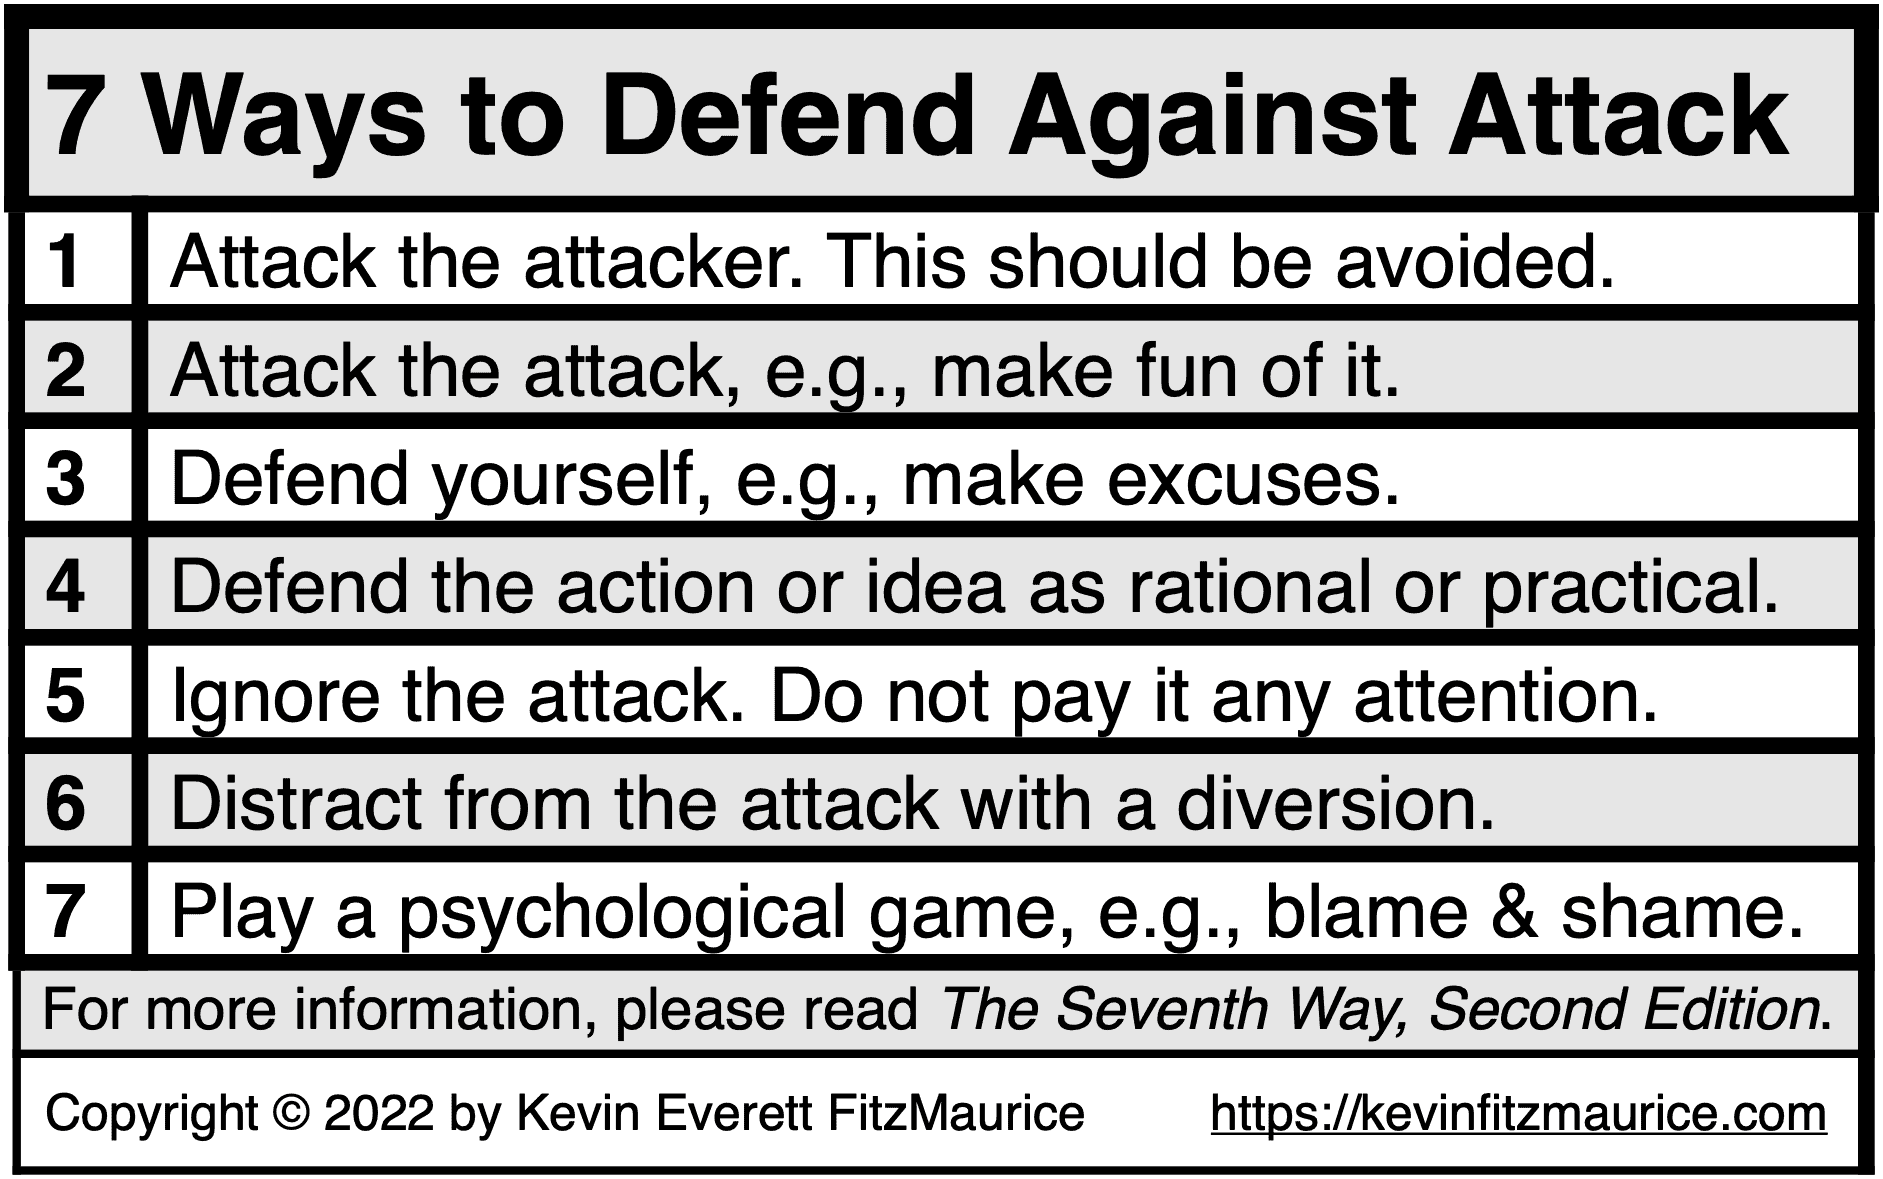 7 Ways to Defend Against Attack